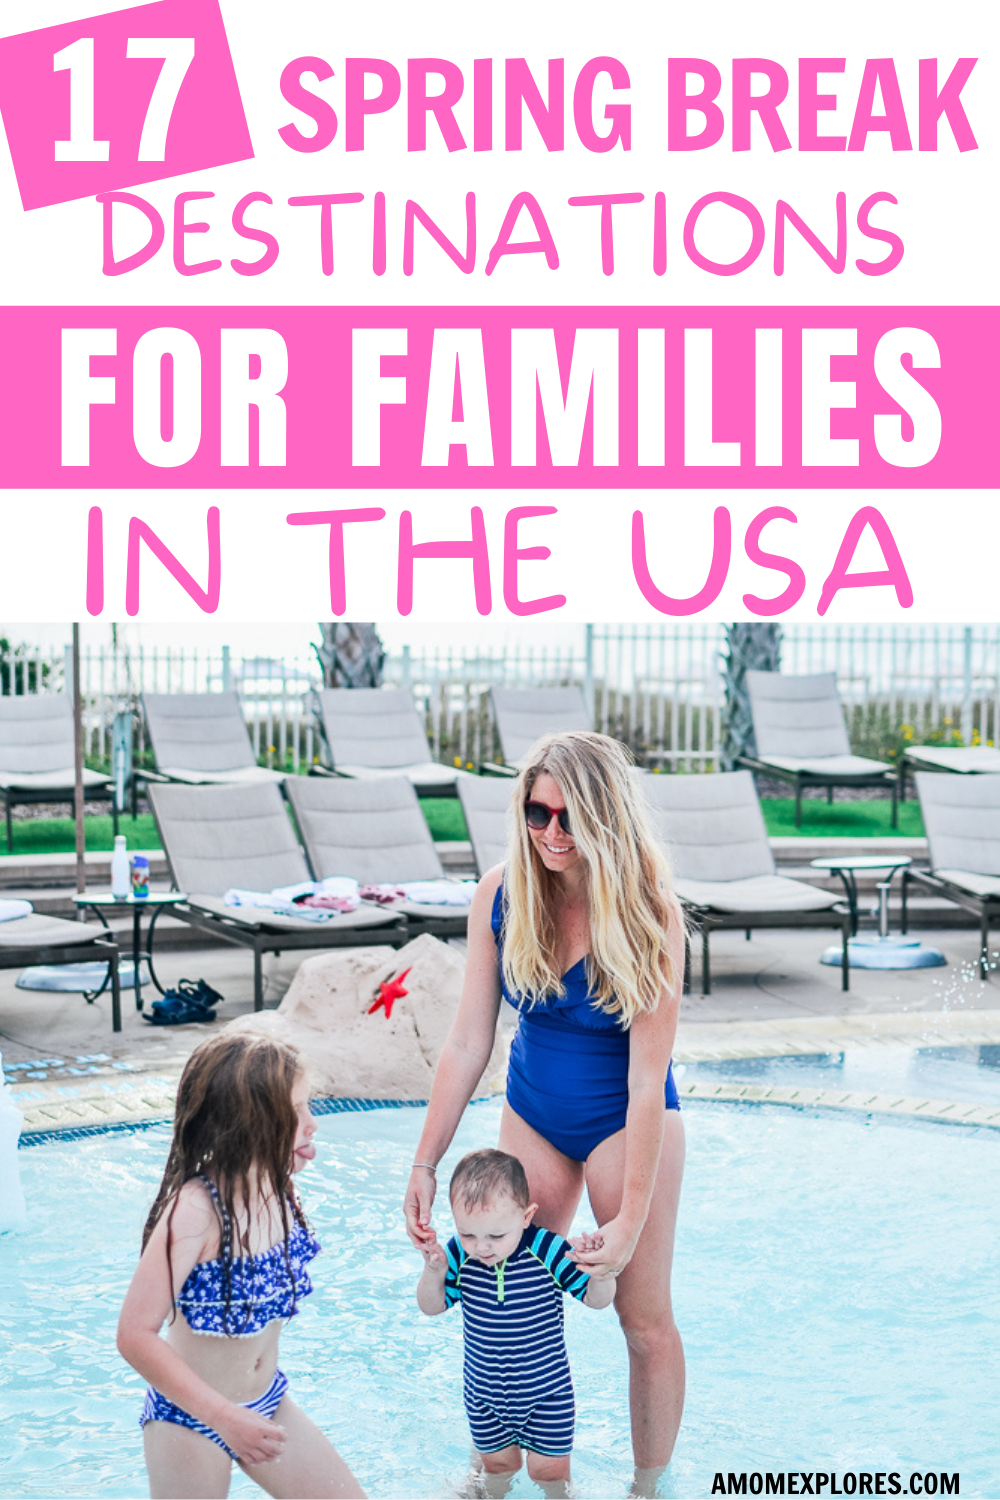 17 SPRING BREAK DESTINATIONS FOR FAMILIES IN THE USA.png